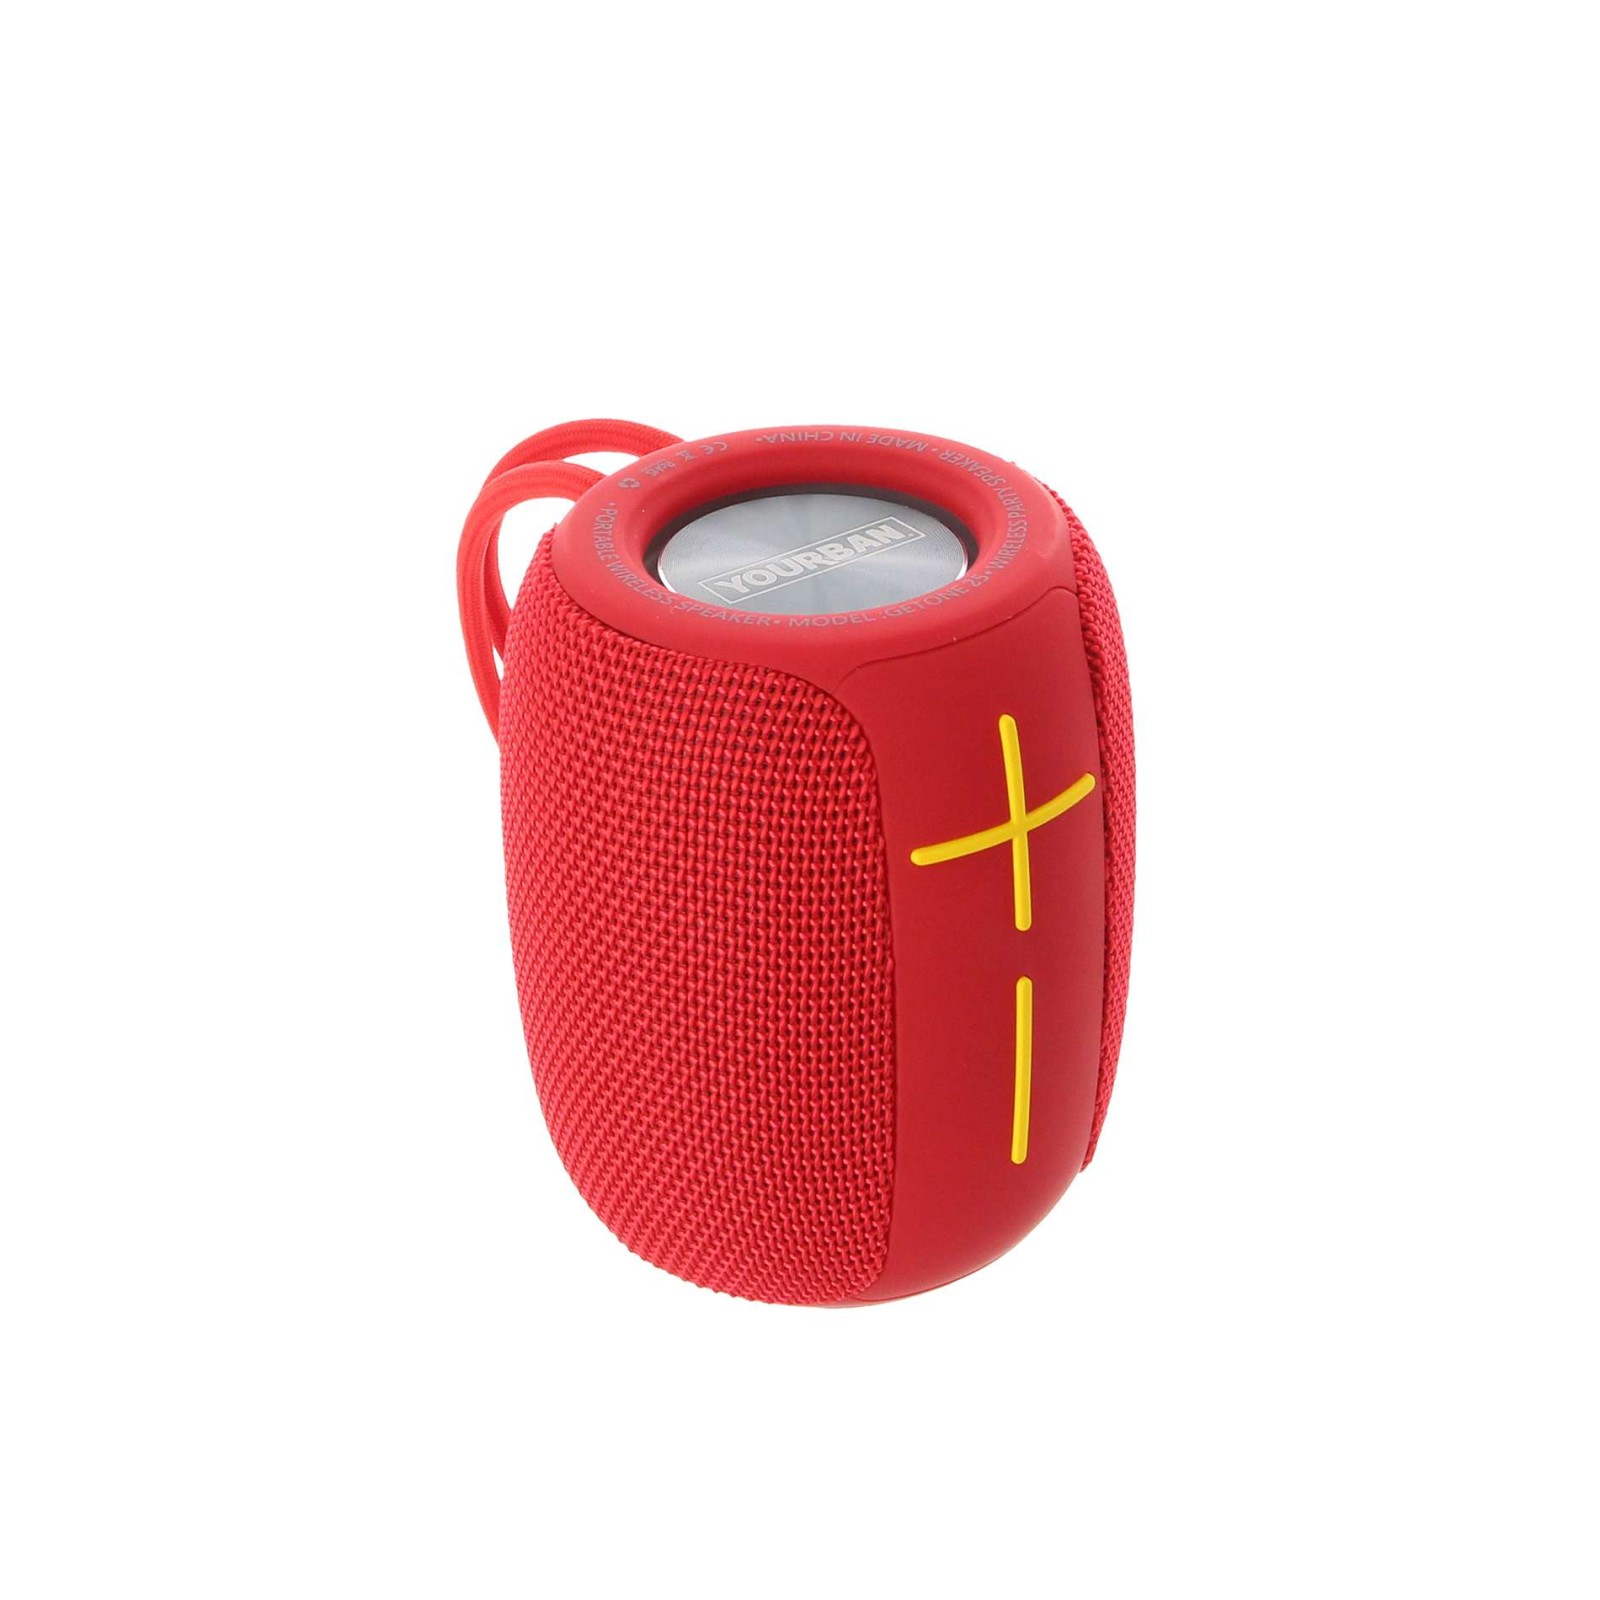 YOURBAN GETONE 25 RED - ENCEINTE NOMADE BLUETOOTH COMPACTE ROUGE 